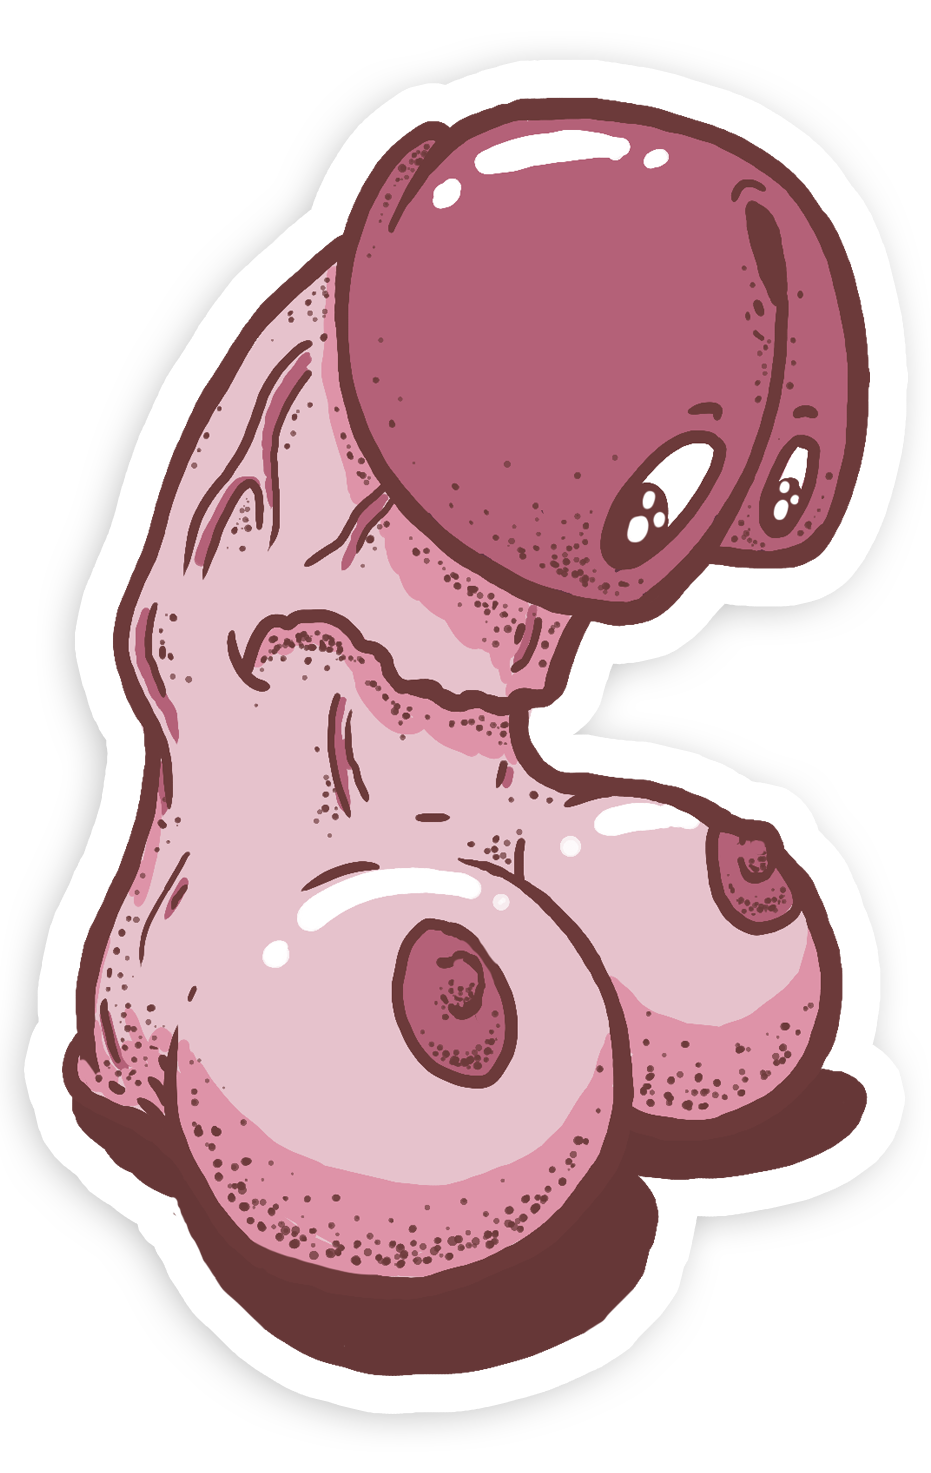 willy sticker.png